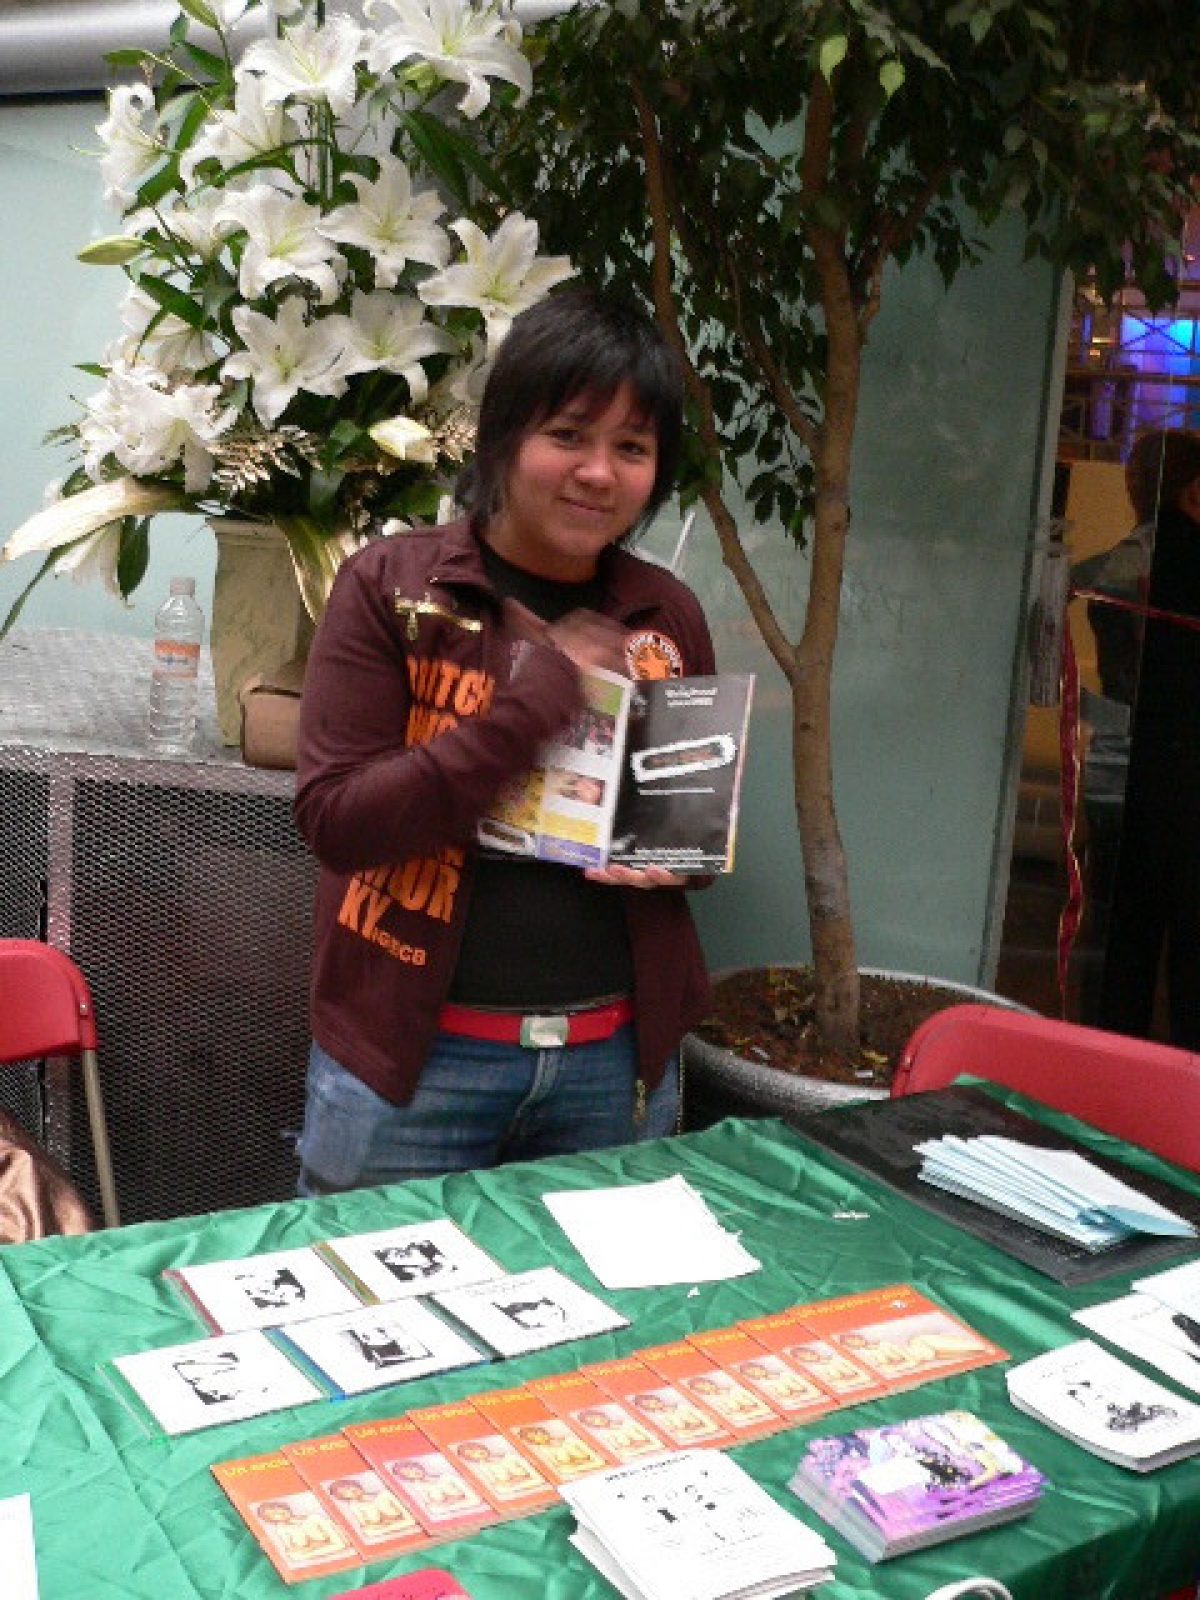 The photo shows a person, Chichis Glam, tending a table full of flyers and other lesbian ephemera at the 2nd Lesbian Festival organized by Martha Cuevas at the Cabaré-Tito VIP in Mexico City. Chichis is holding up a piece of ephemera and looking at the camera.